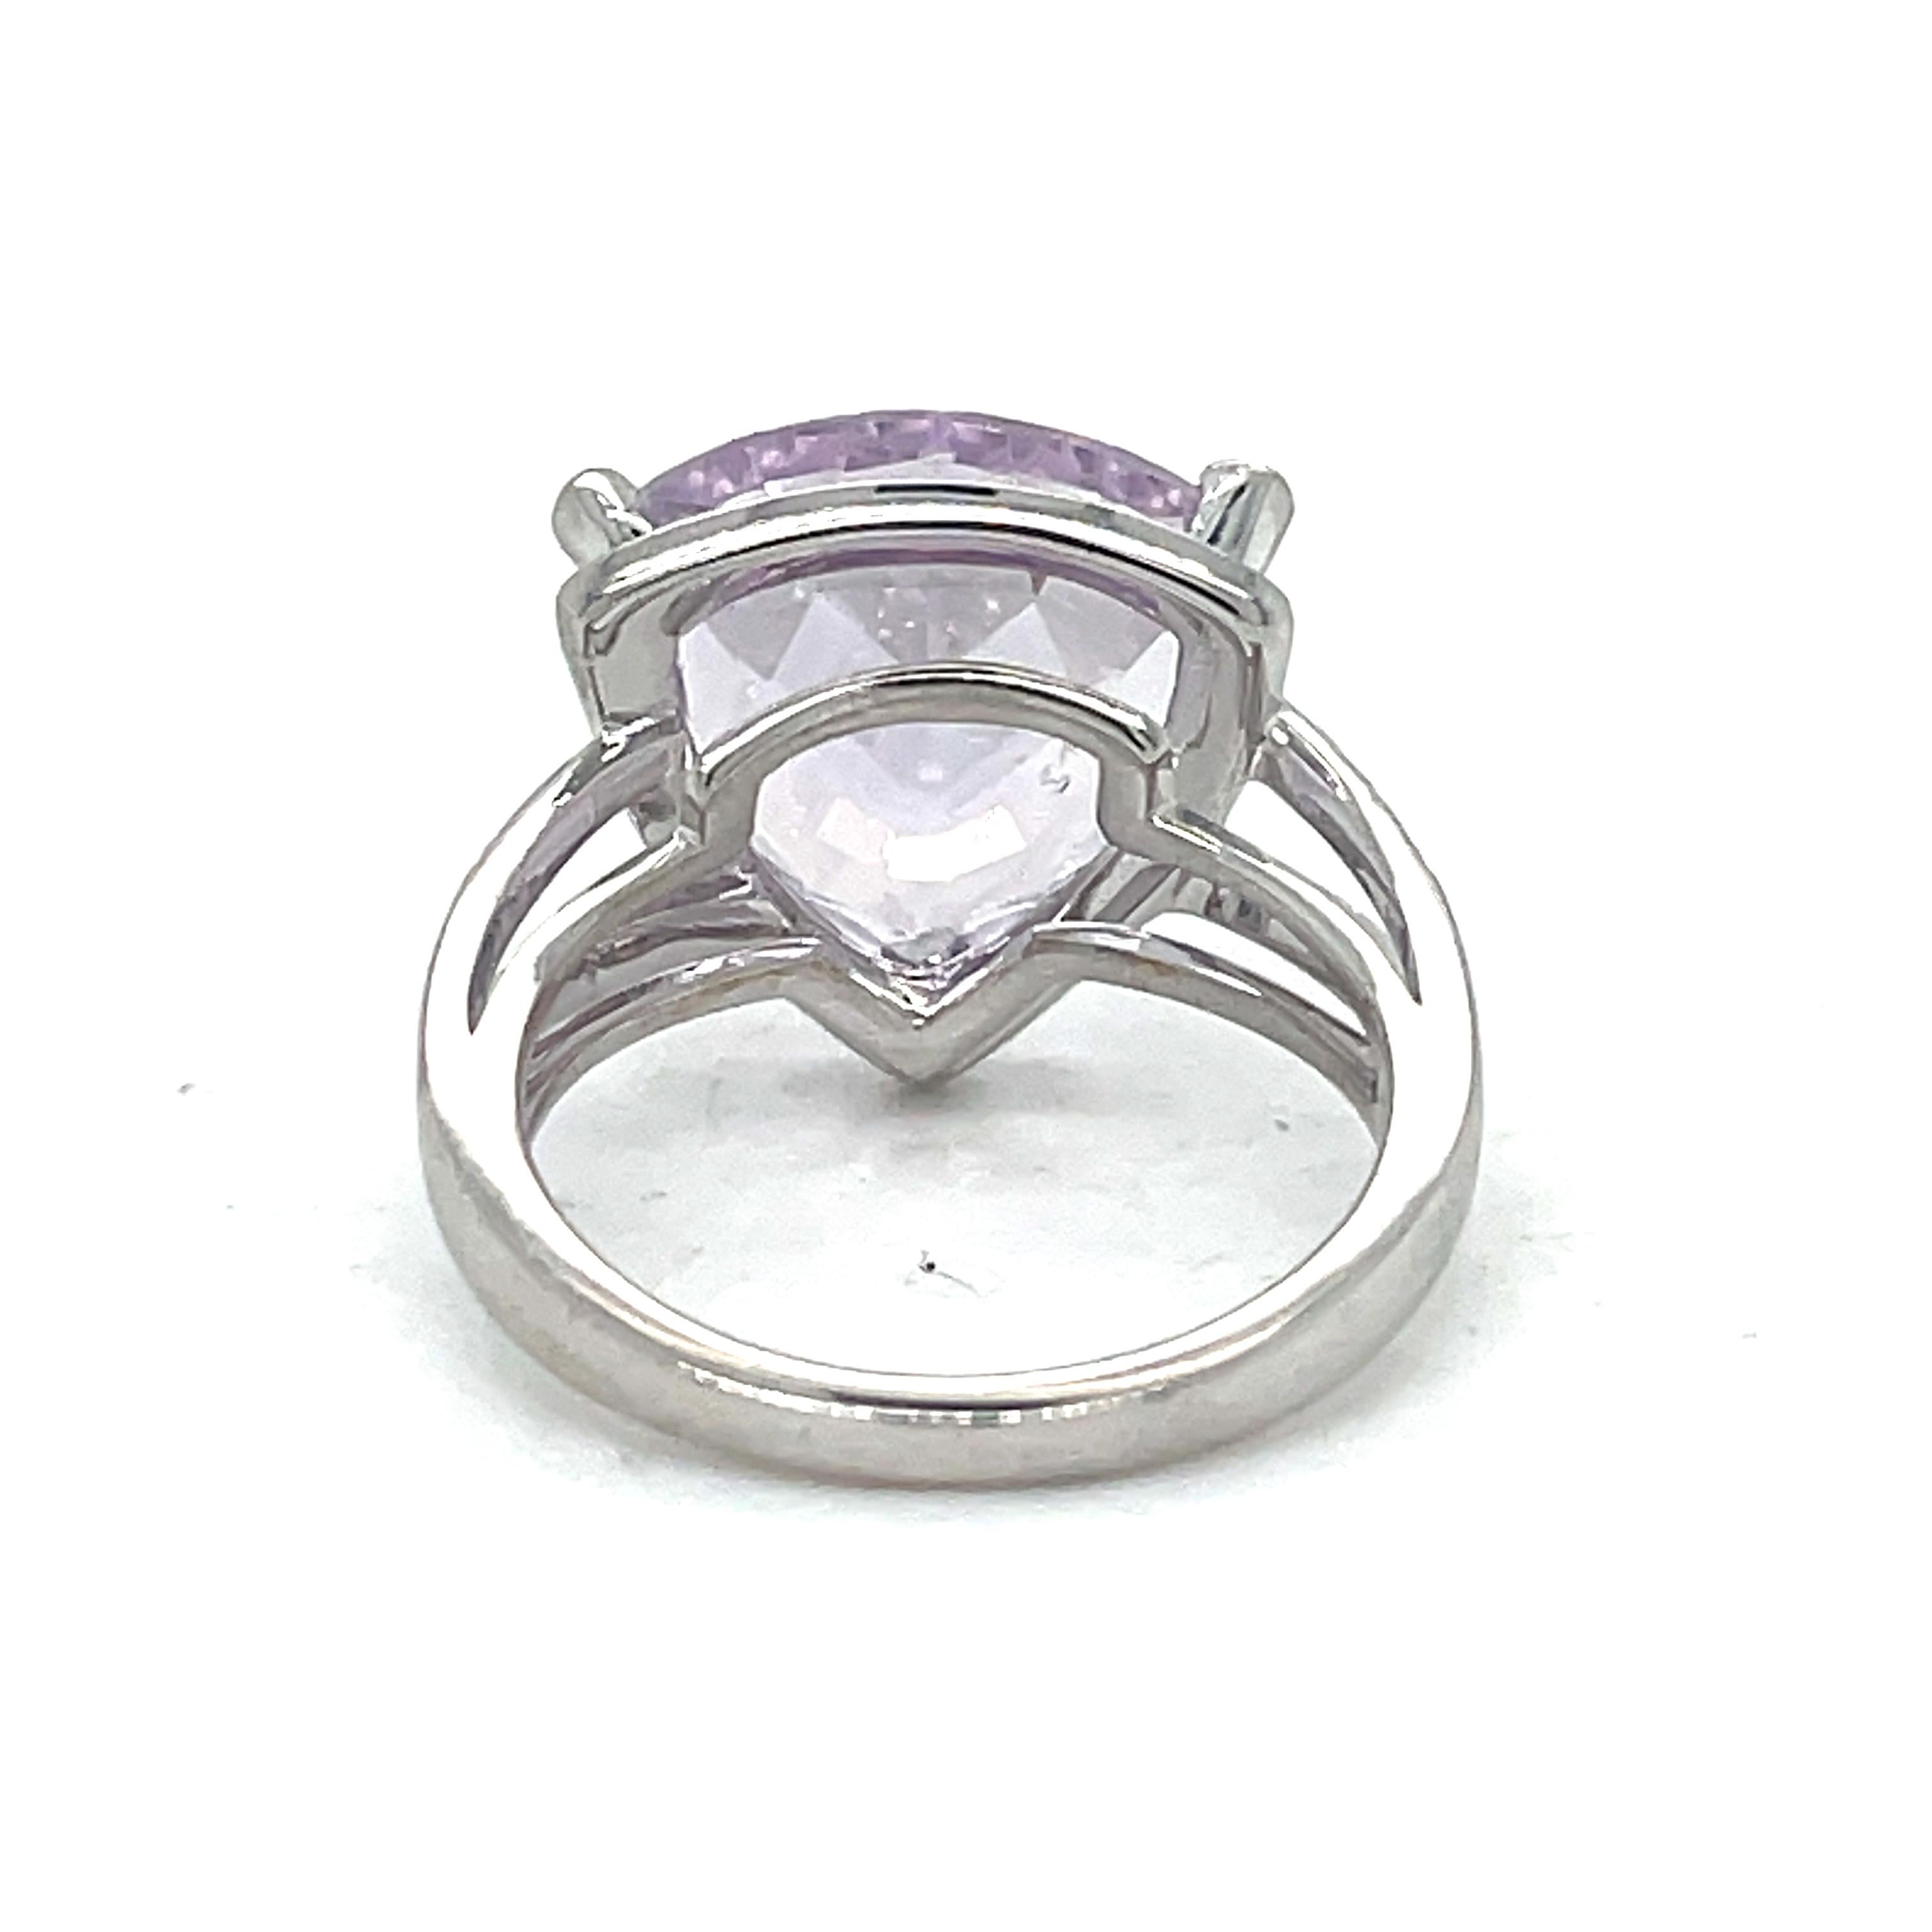 Round Cut Mouboussin Cocktail Ring - Mes Couleurs À Toi, 5CT France rose Amatyst ring For Sale